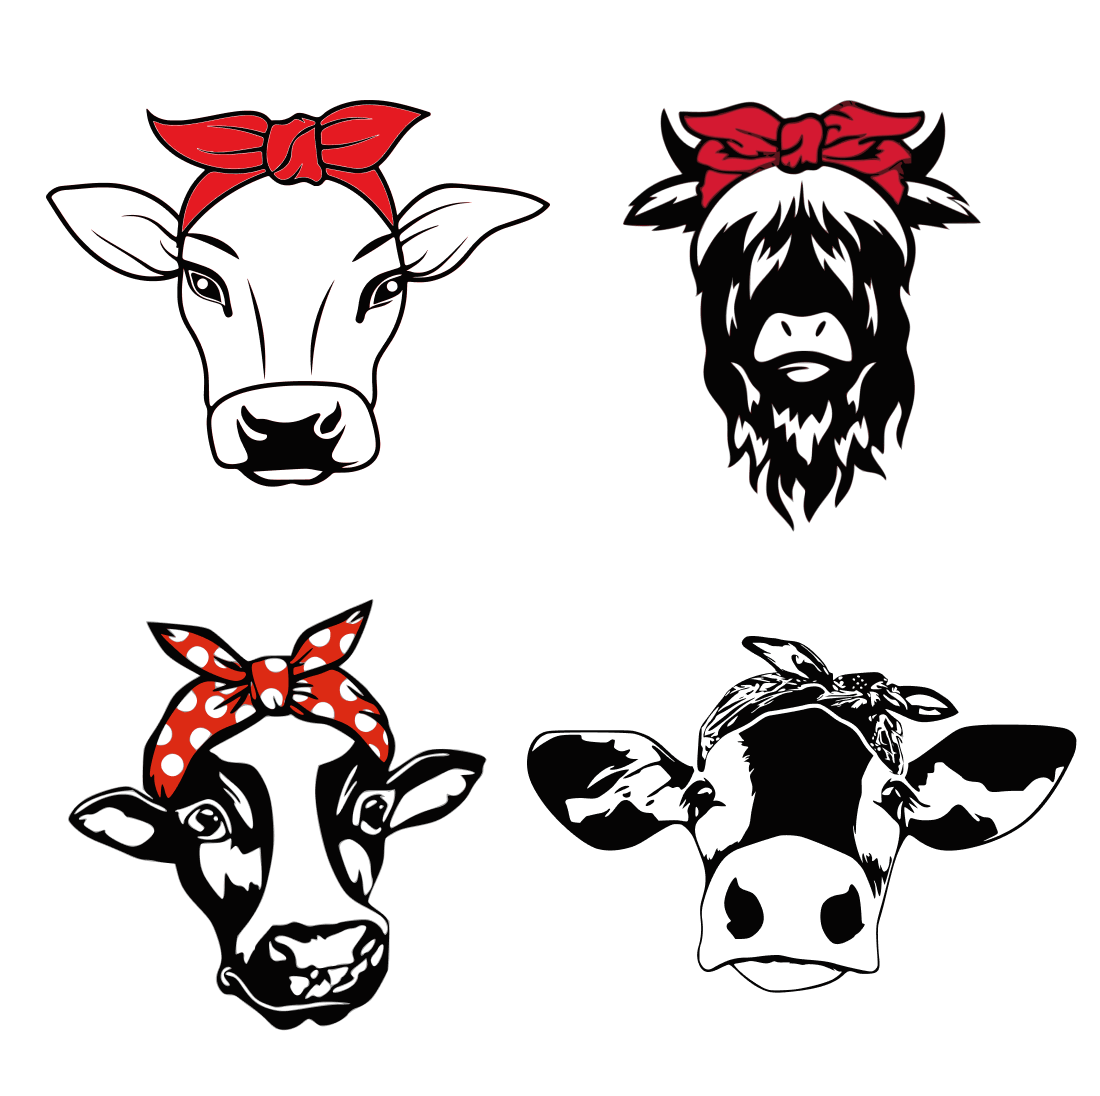 Set of four cow heads with bows on their heads.